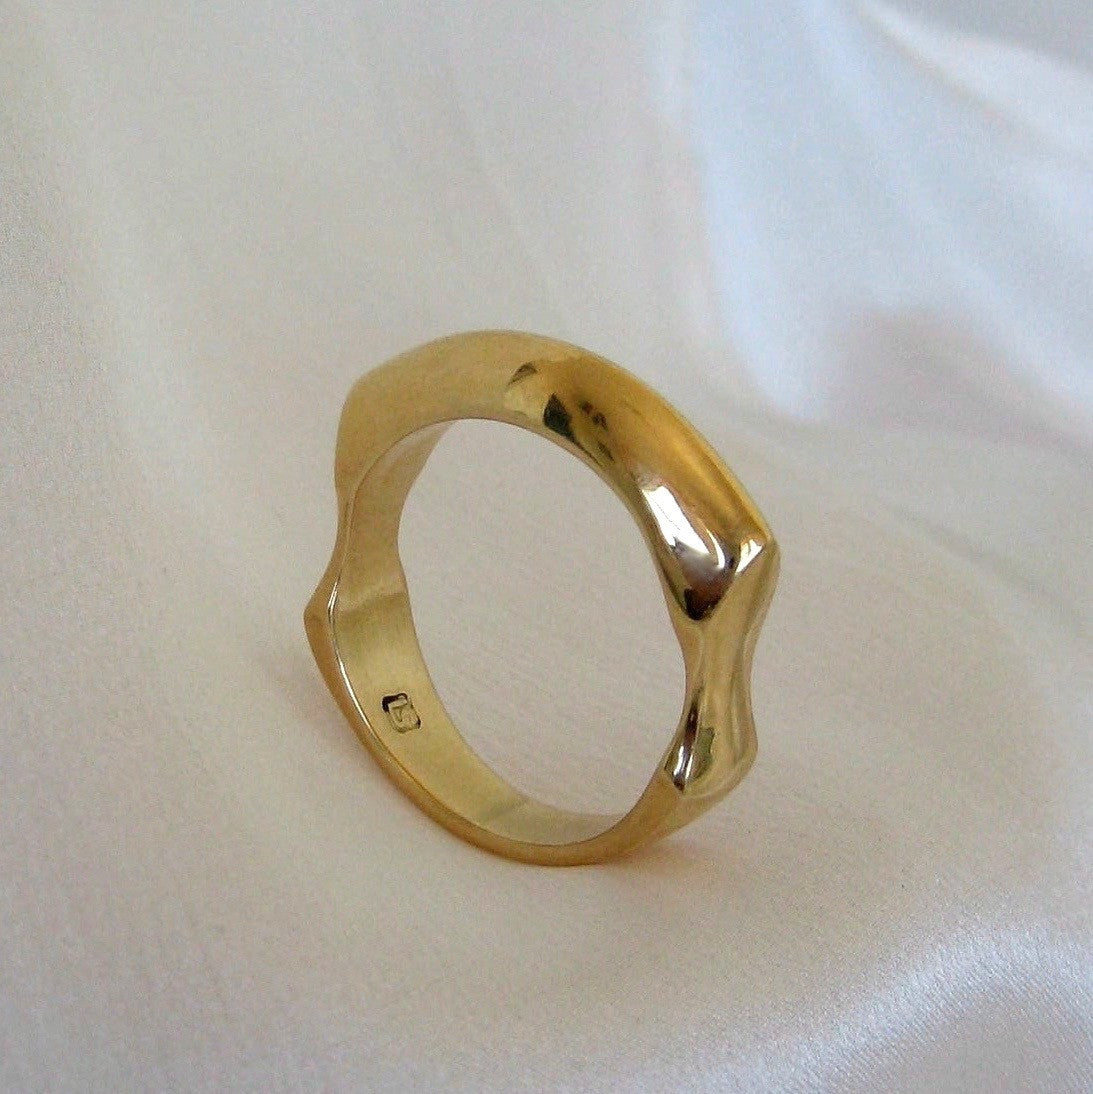 Rings - Solid Sexy Sculpted Handmade Wedding Ring Or Dress Ring